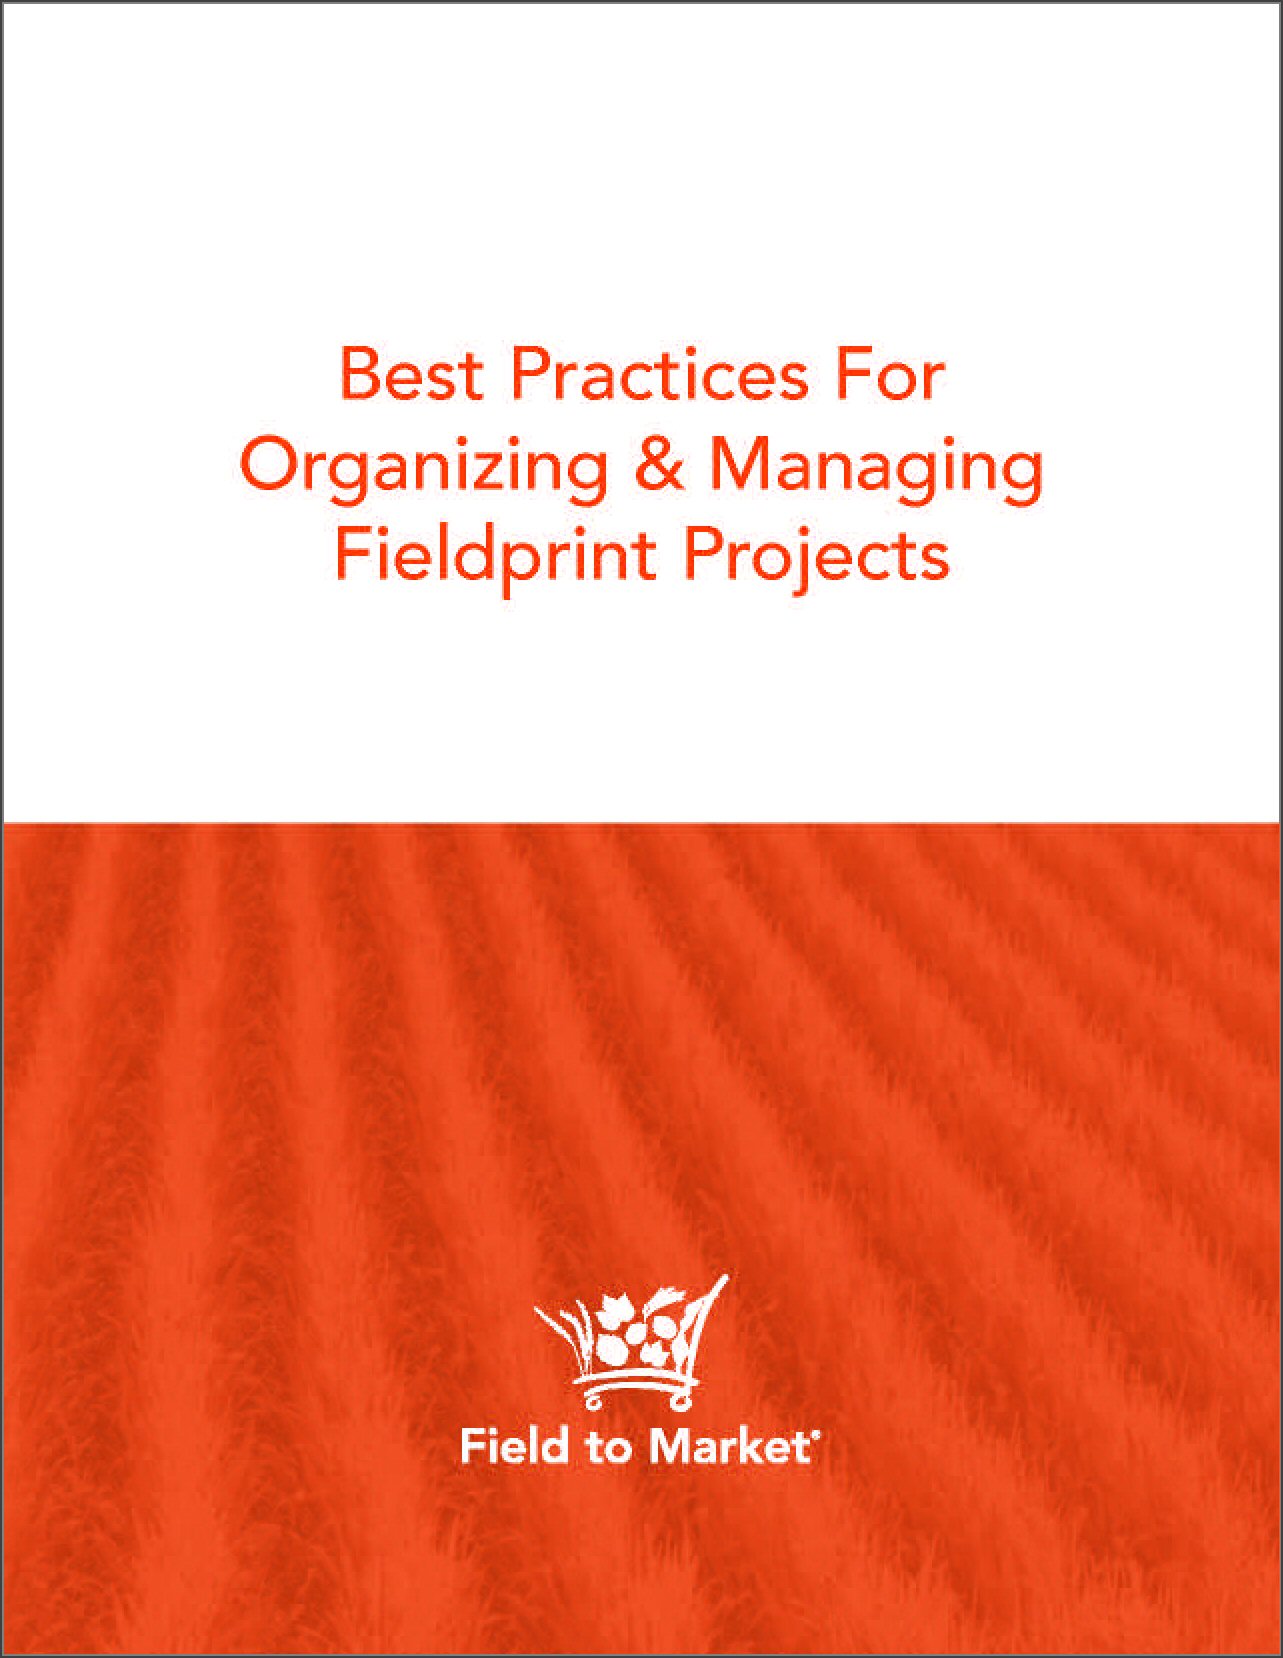 Fieldprint Project Best Practices Report